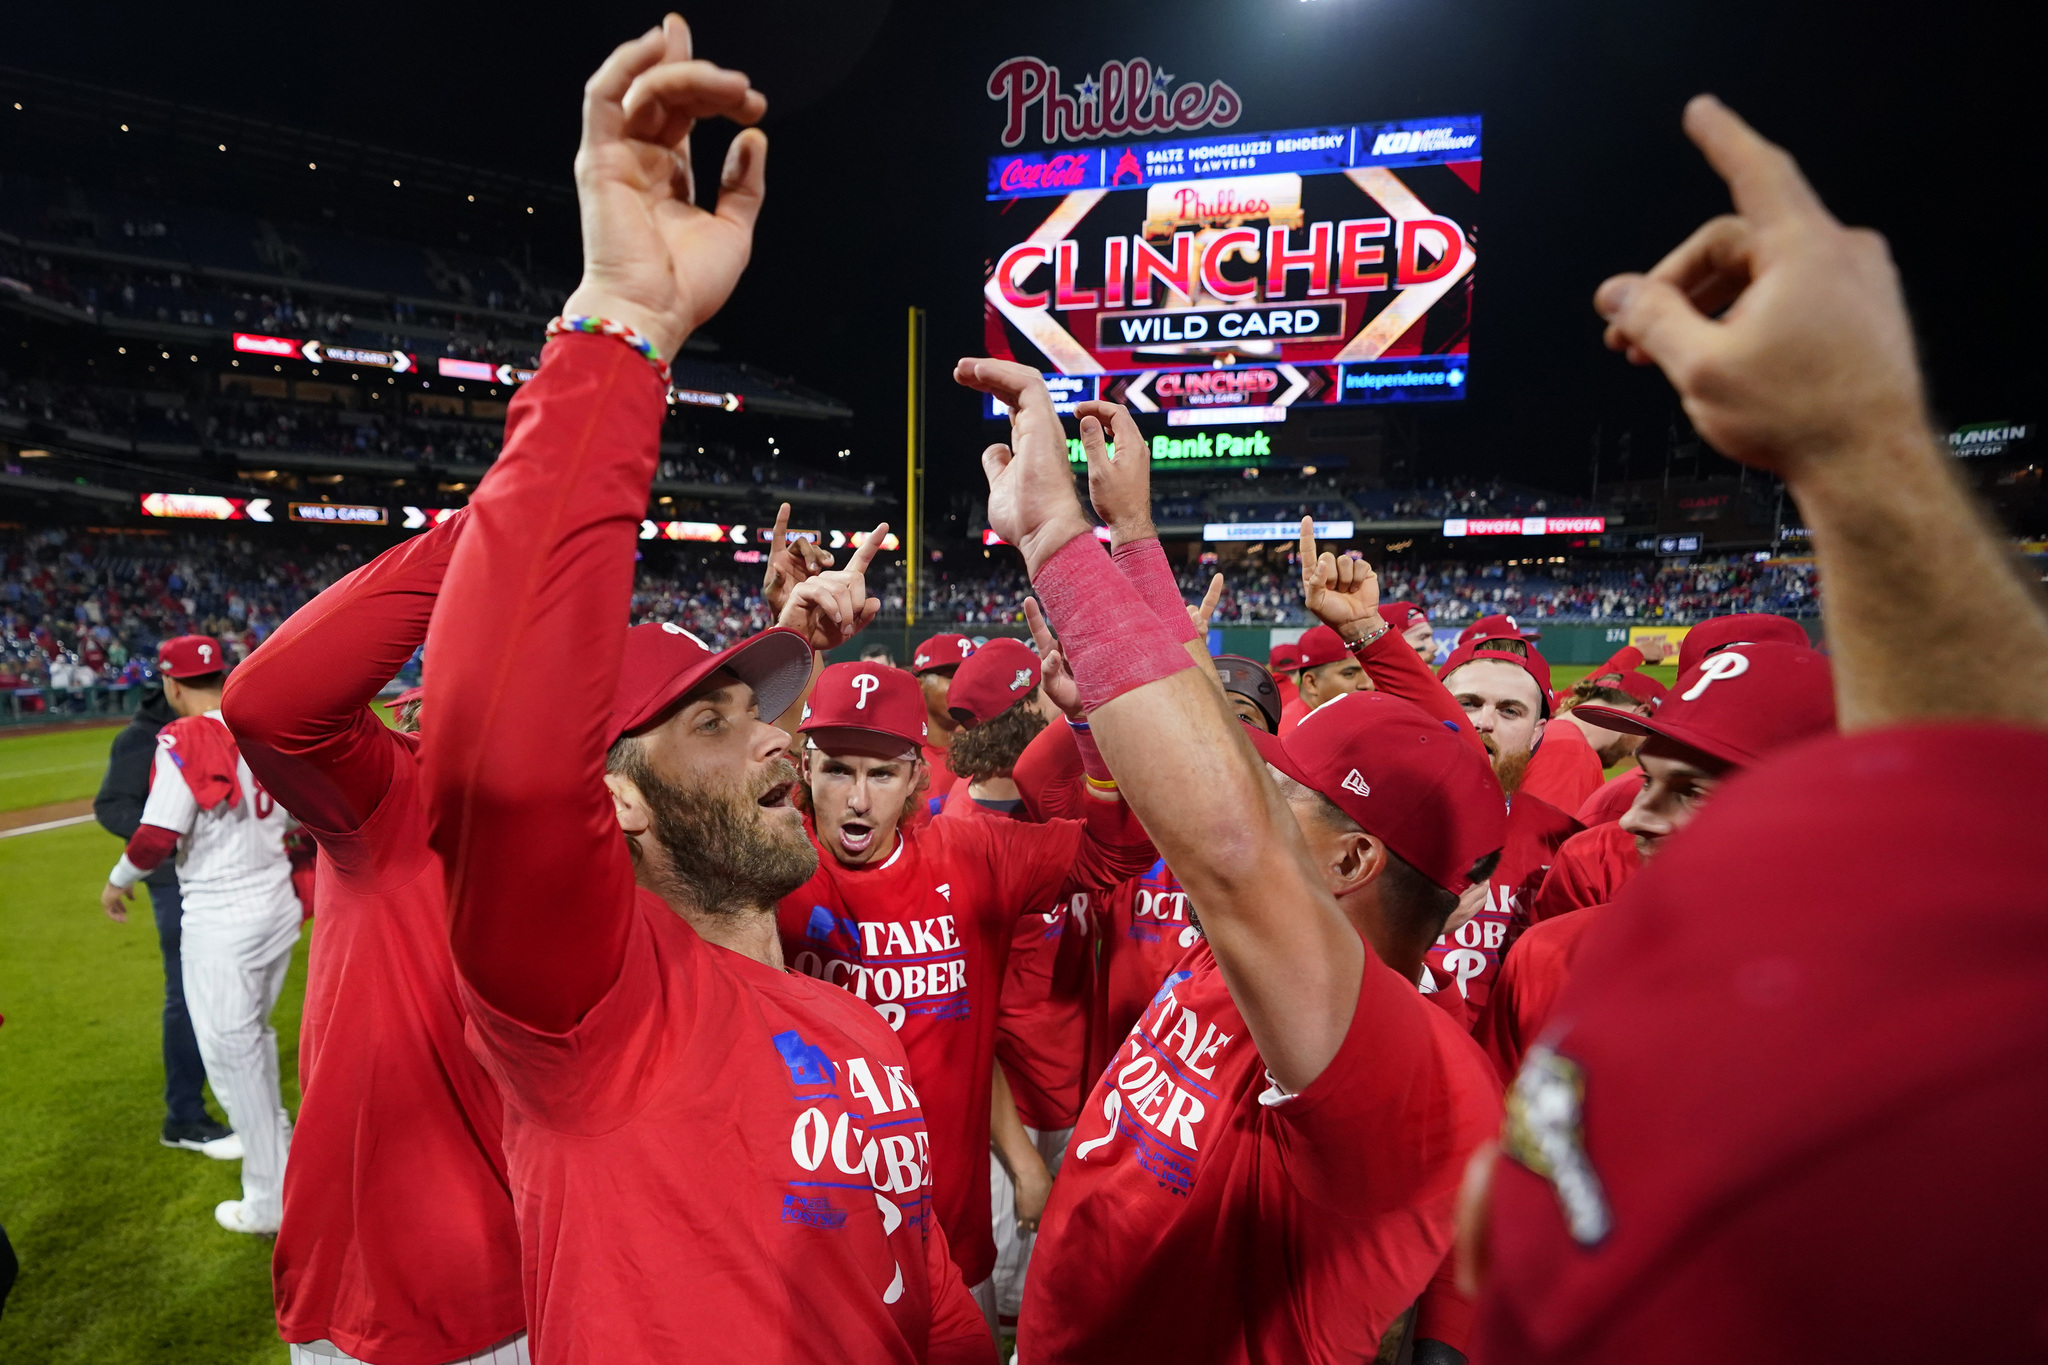 Philadelphia Phillies' Bryce Harper celebrates with teammates after their win in a baseball game against the Pittsburgh Pirates to clinch a wild-card playoff spot.